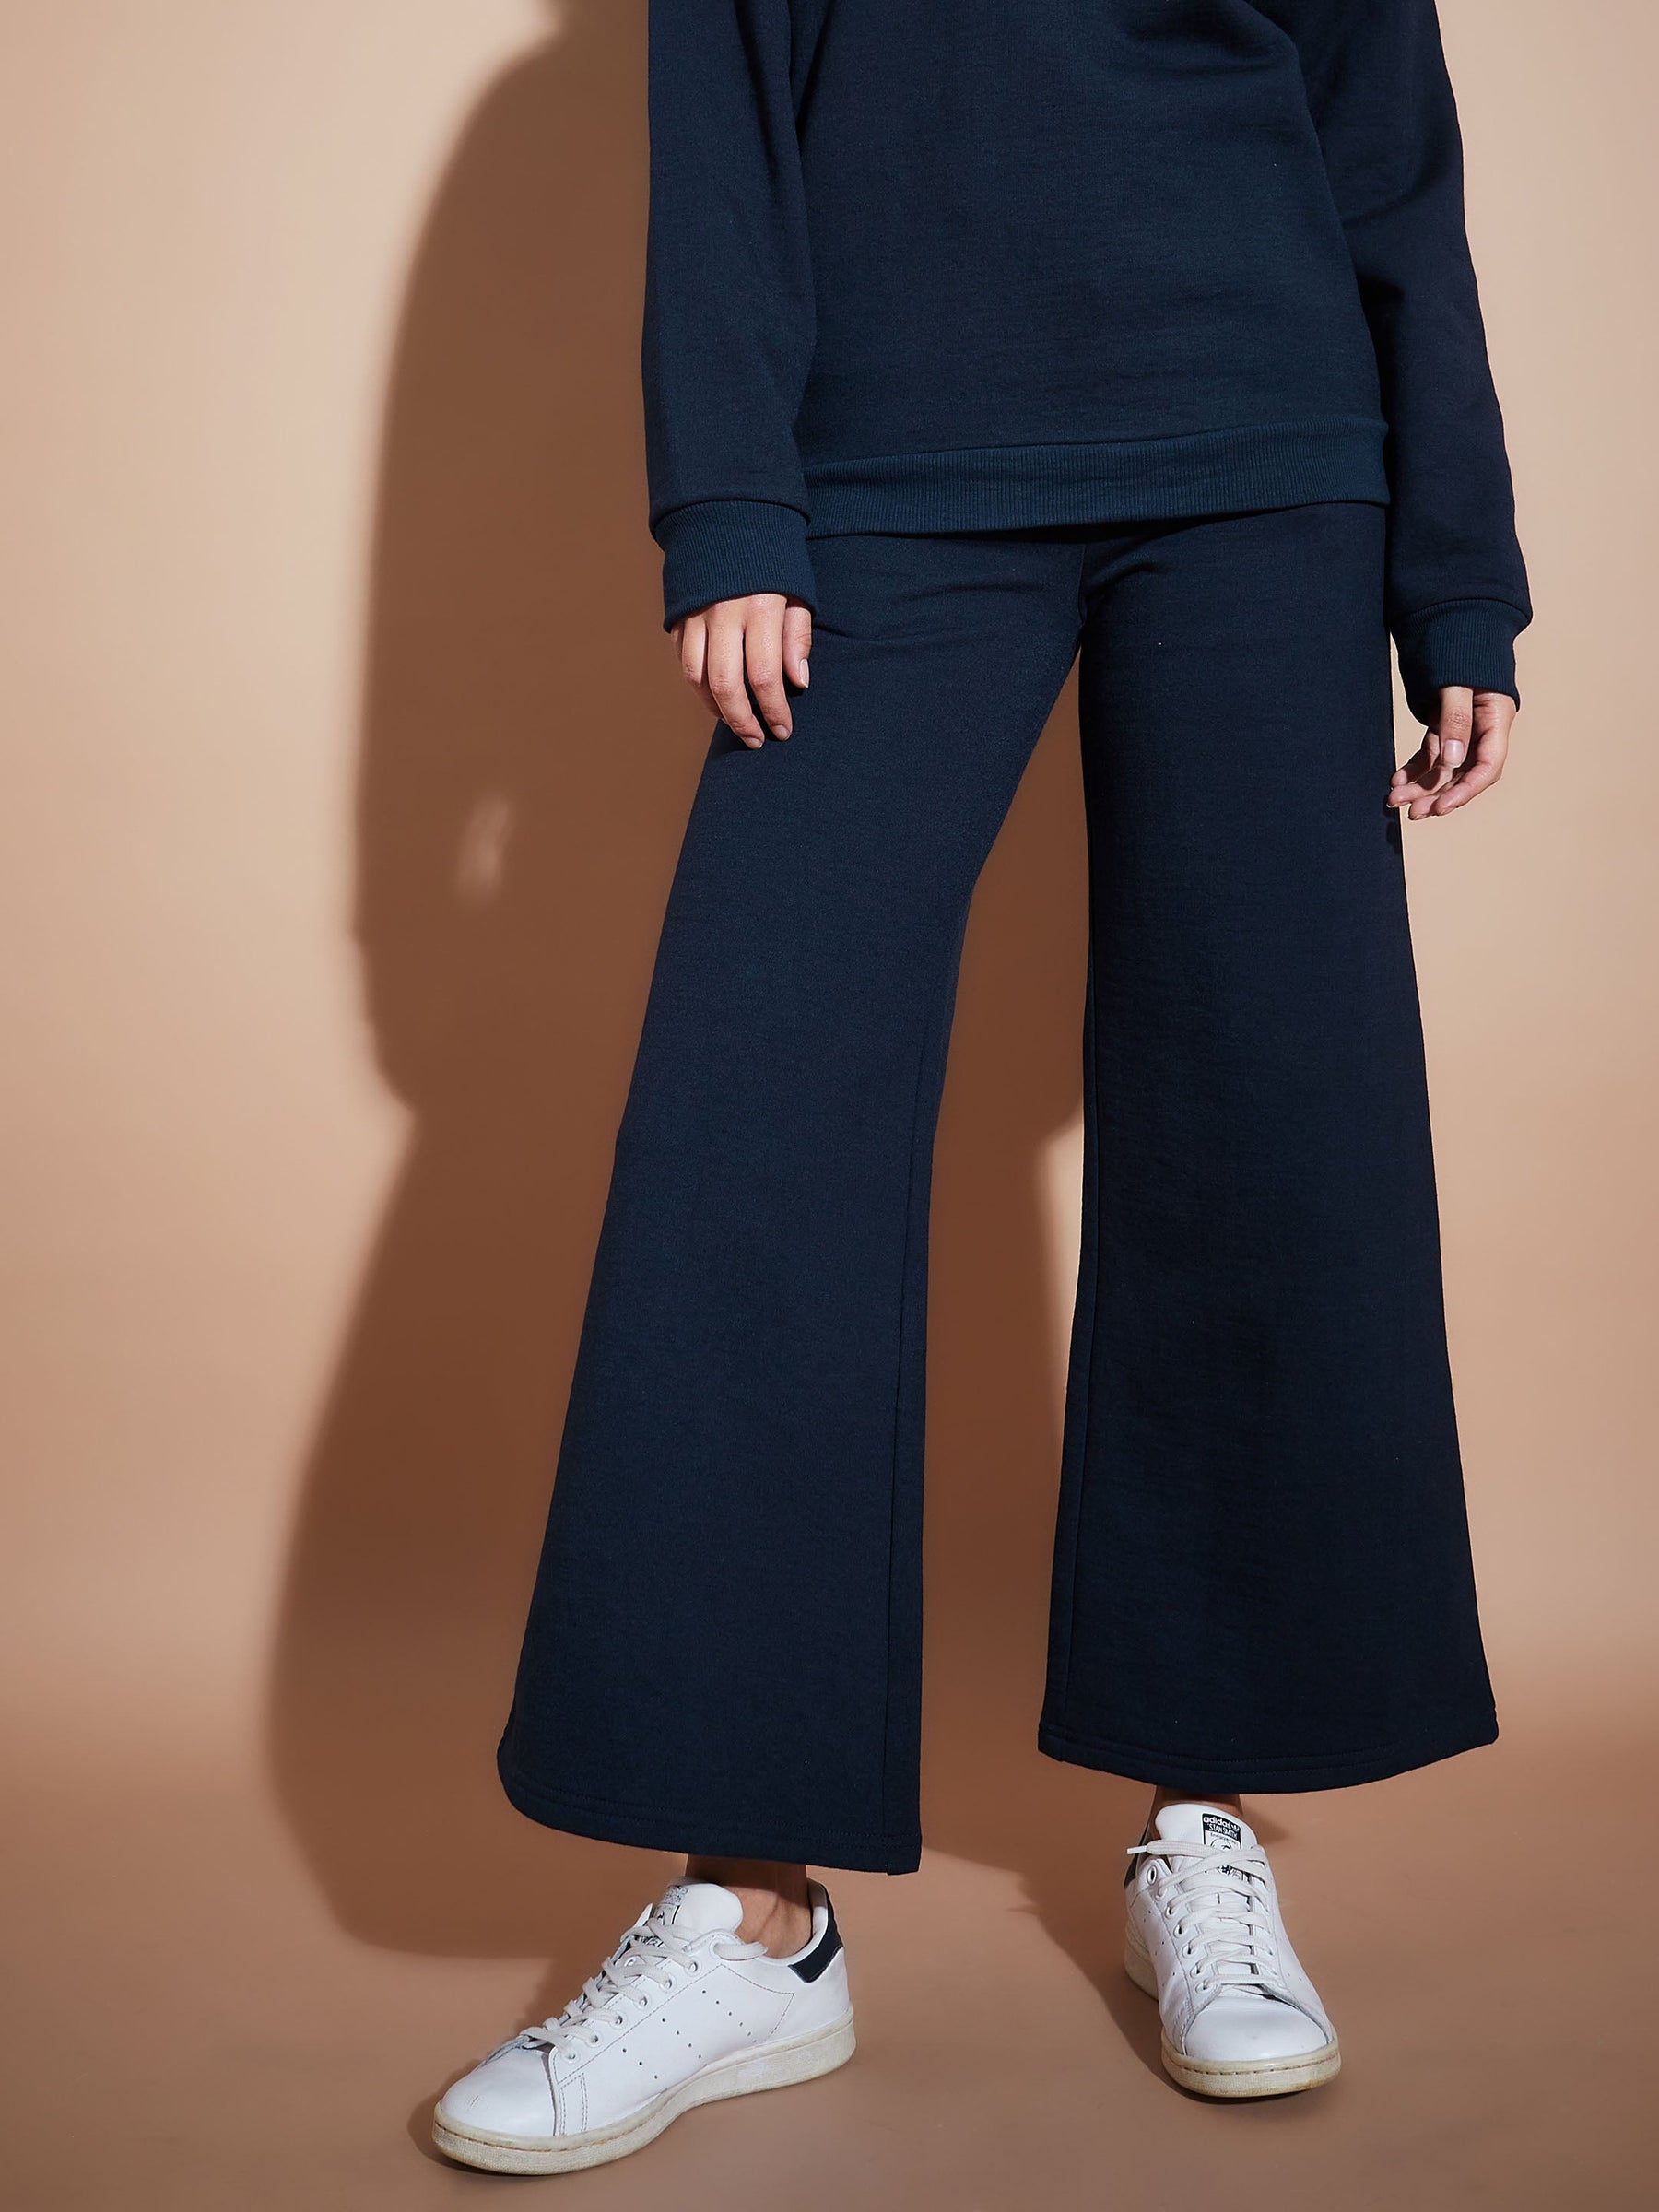 Everlane + The Track Wide-Leg Pant